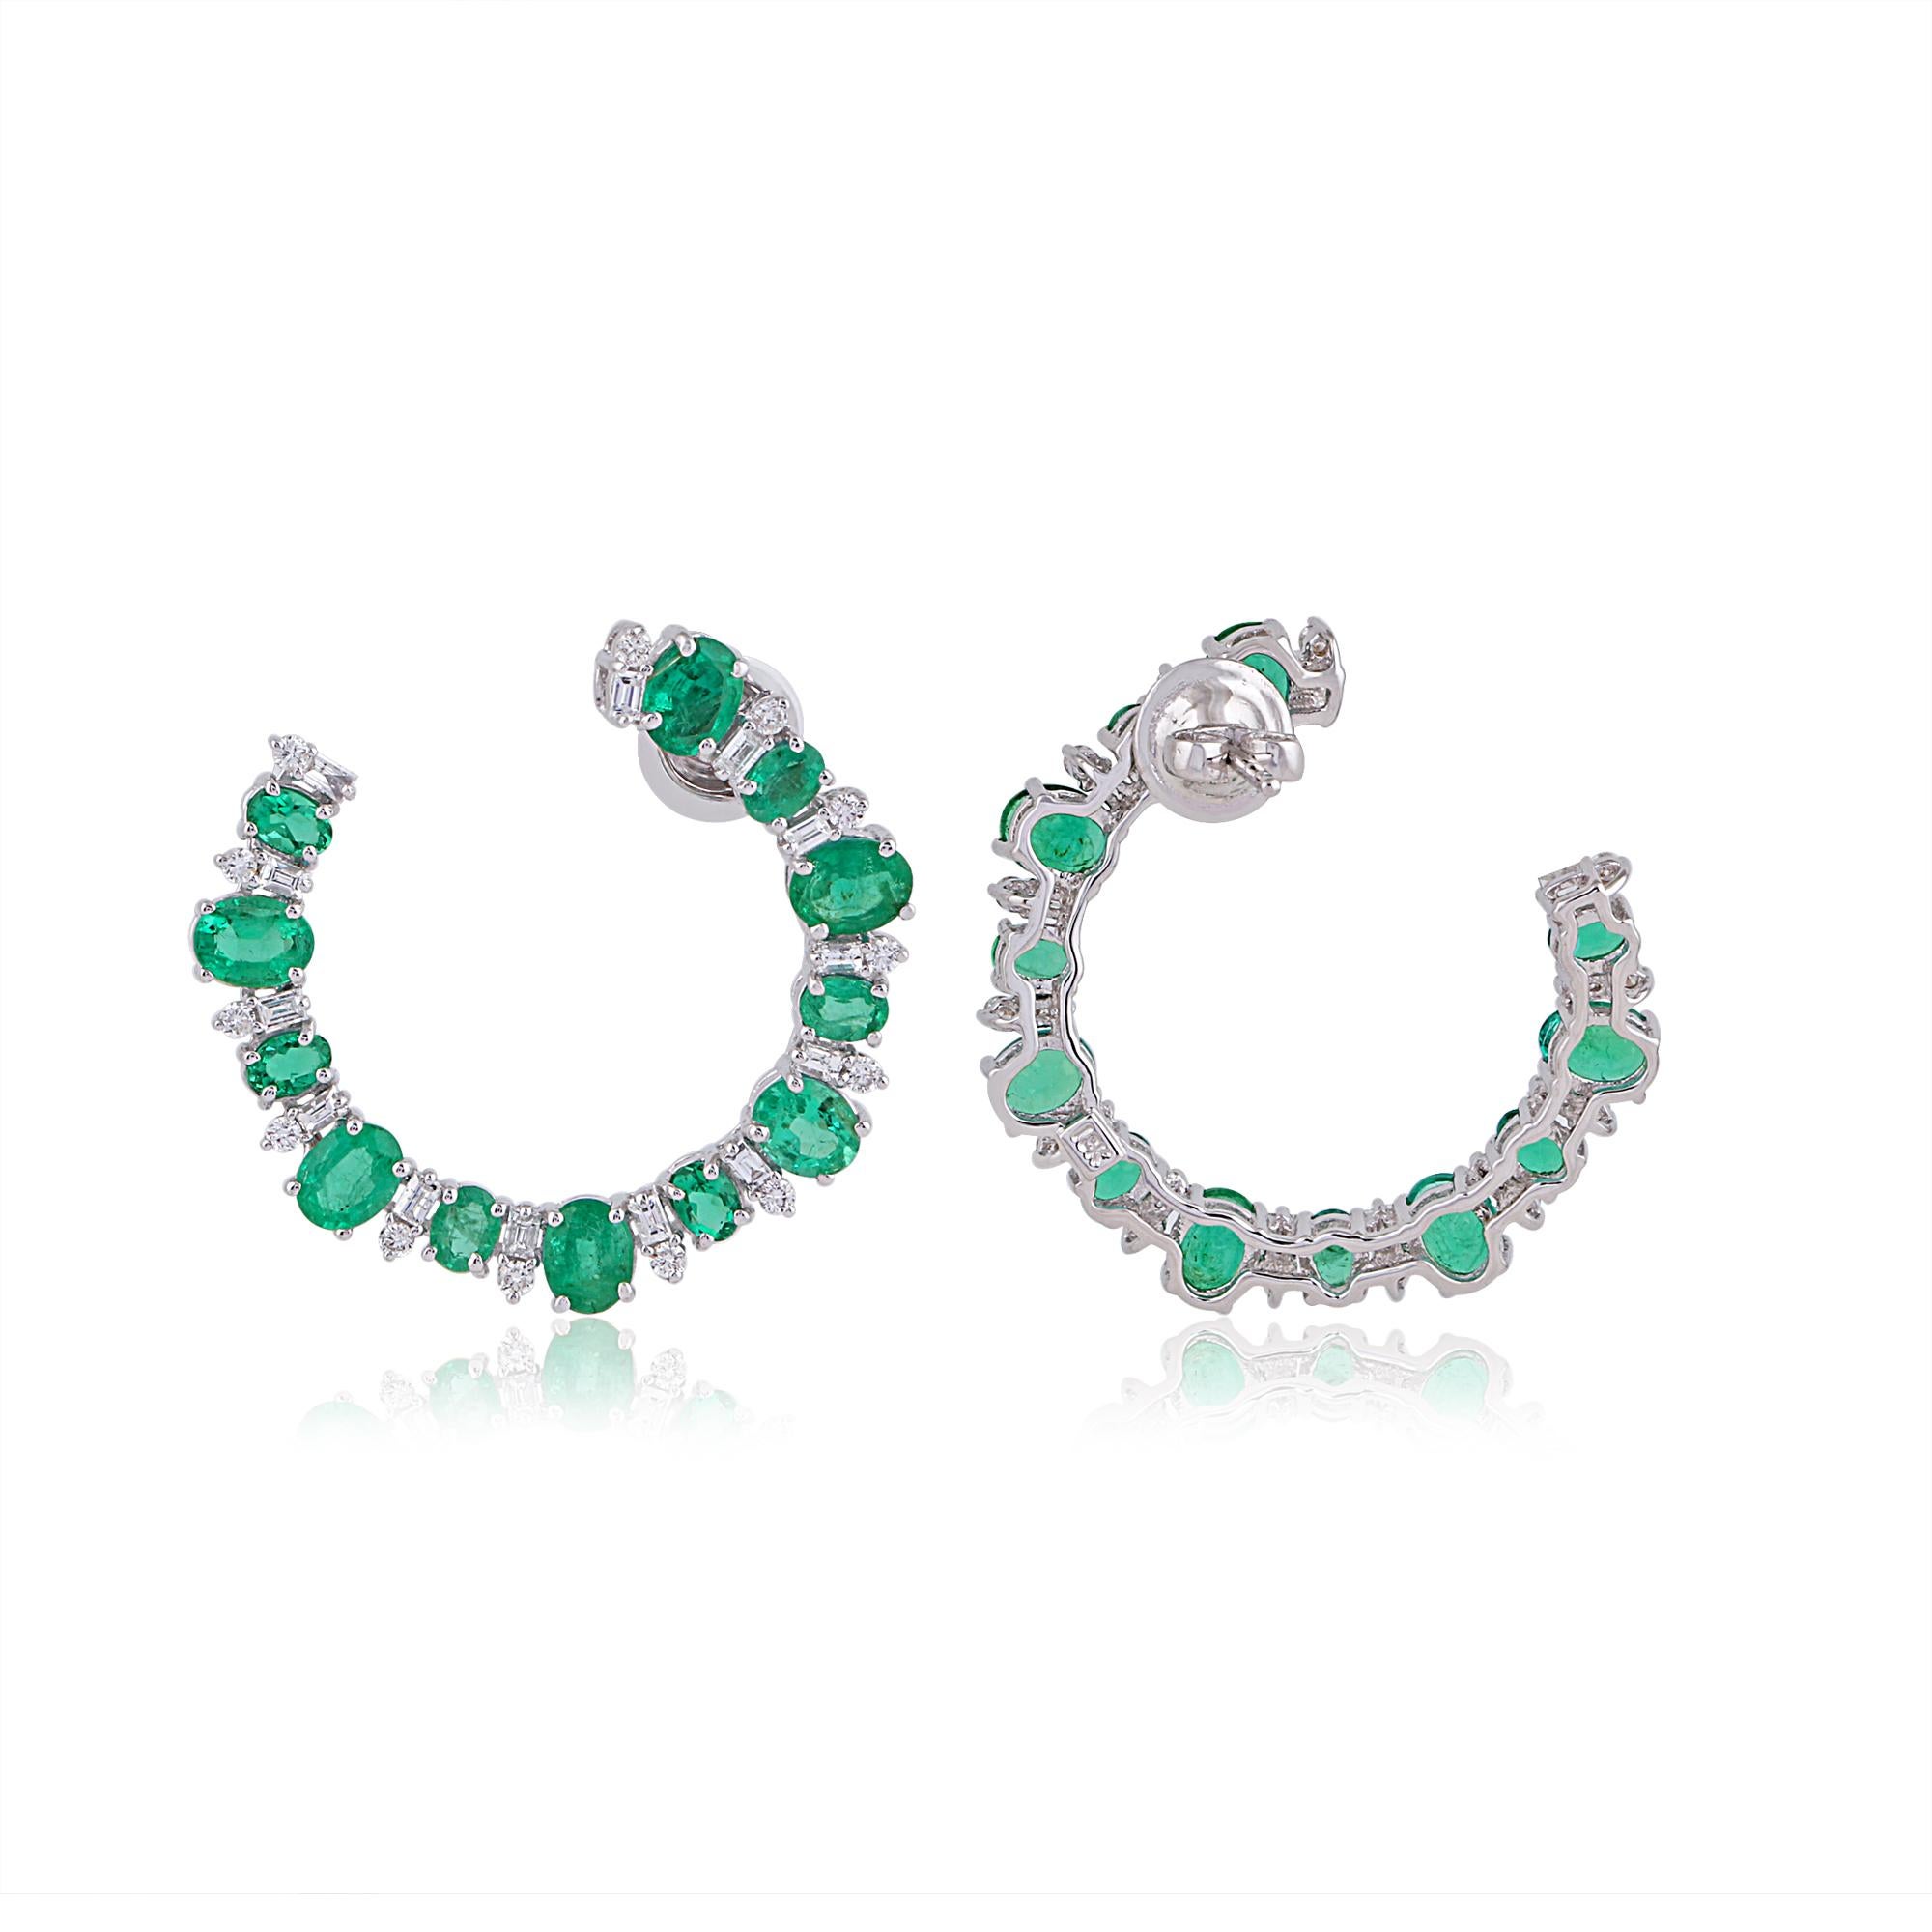 Item Code :- CN-40386
Gross Wt. :- 8.98 gm
18k White Gold Wt. :- 7.73 gm
Diamond Wt. :- 1.05 Ct. ( AVERAGE DIAMOND CLARITY SI1-SI2 & COLOR H-I )
Emerald Wt. :- 5.20 Ct. 
Earrings Size :- 28 mm approx.

✦ Sizing
.....................
We can adjust